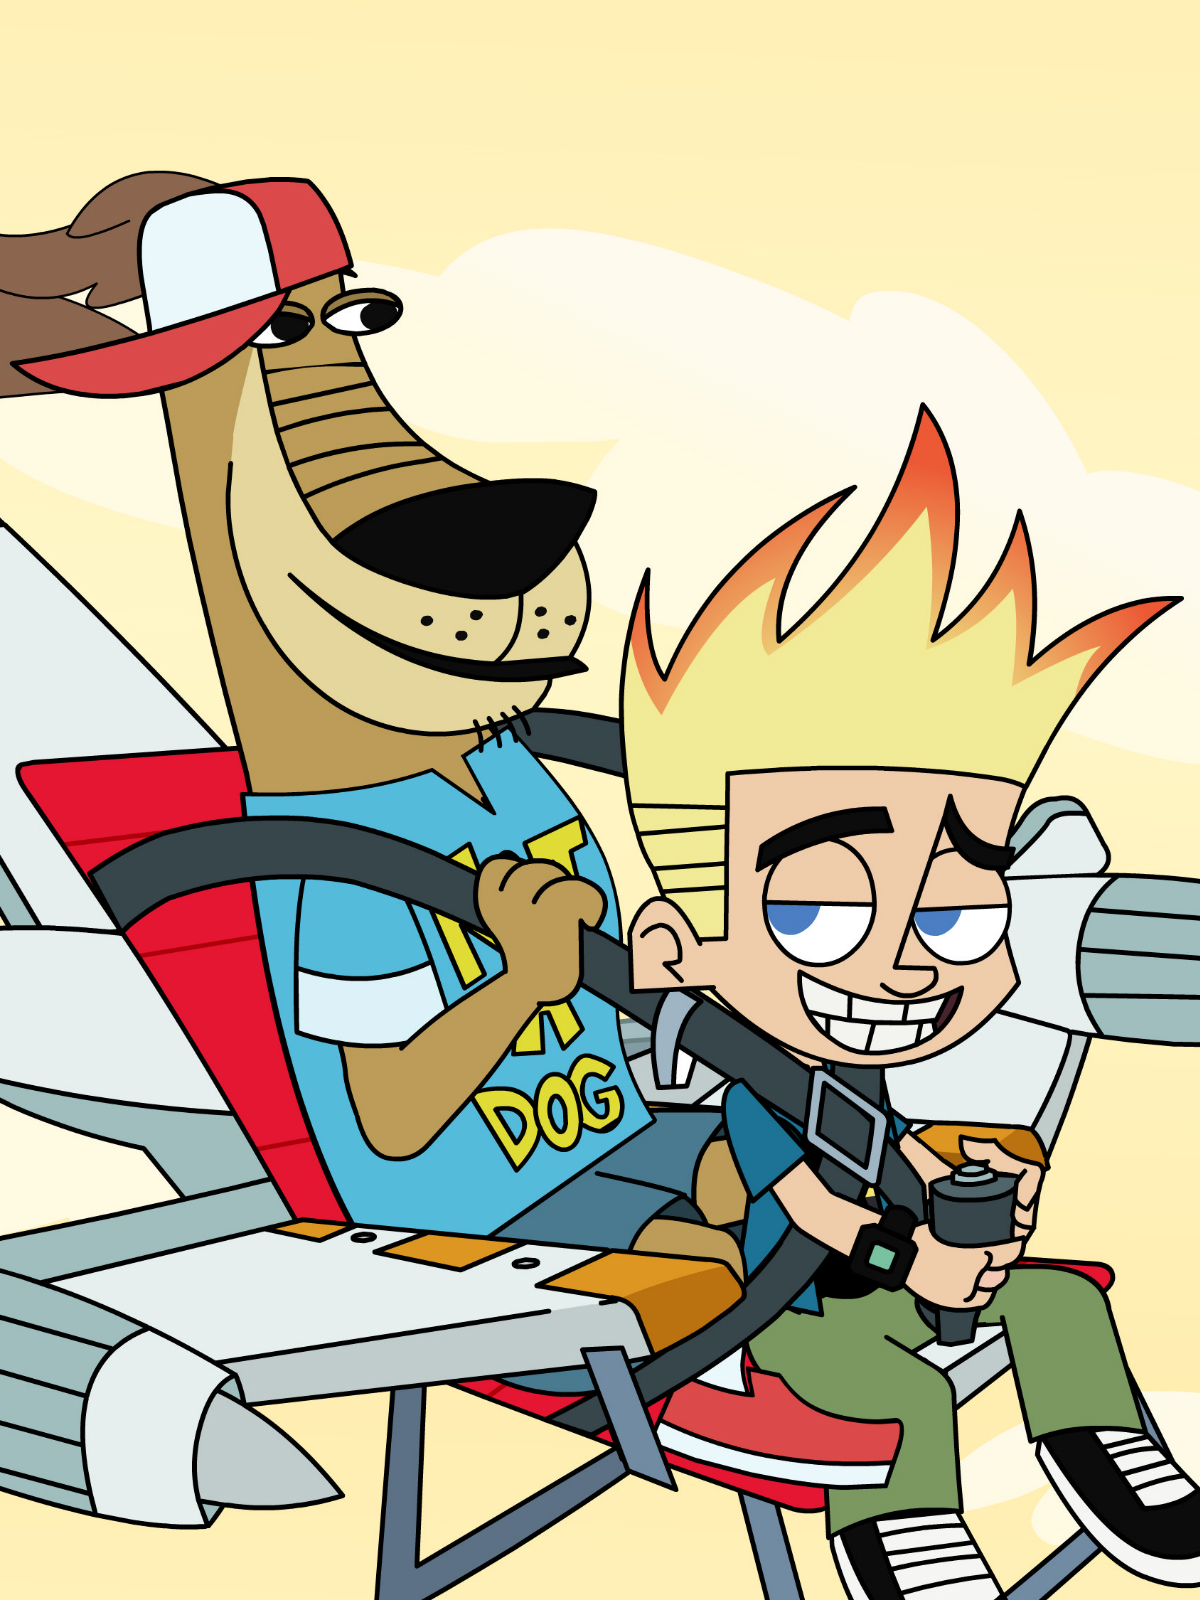 In broadcast) - Johnny Test is a boy who lives in the city of Porkbelly wit...